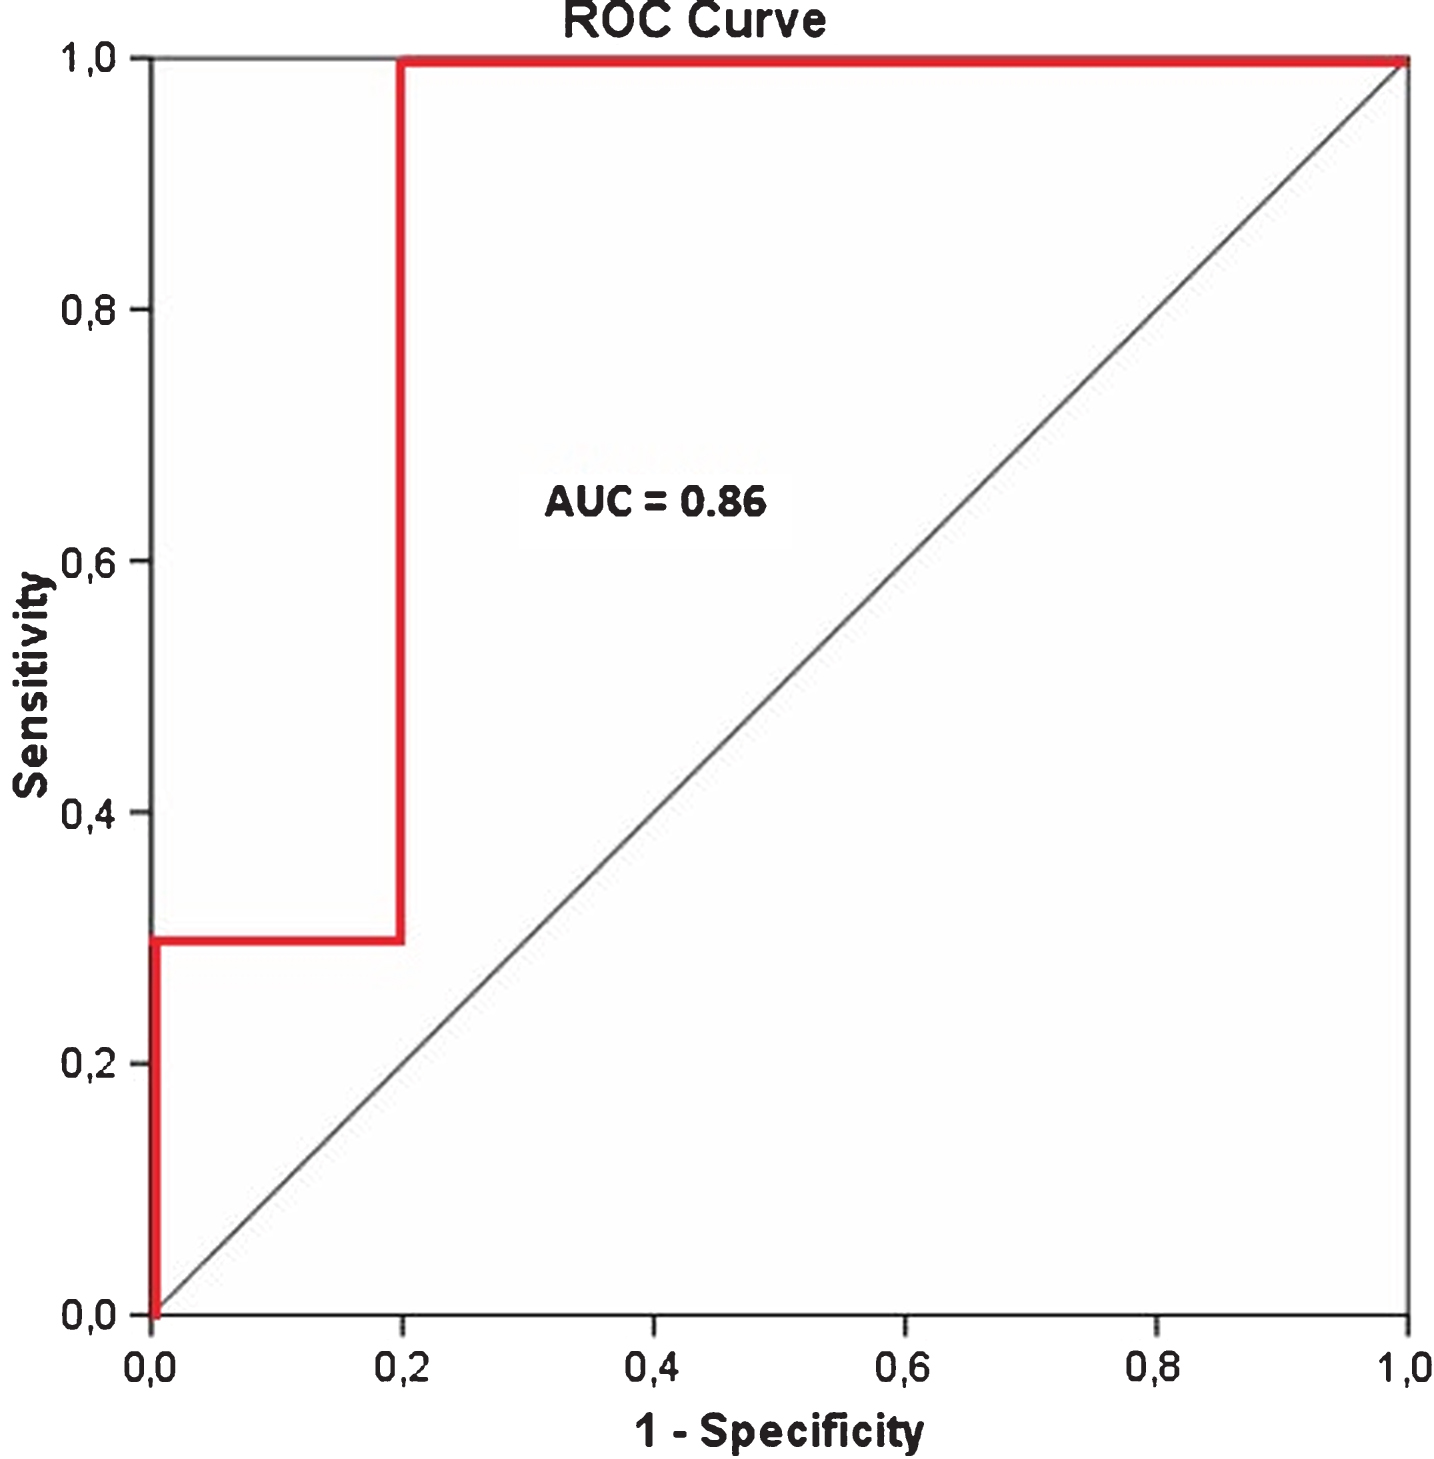 Receiver operator characteristic (ROC) curve (in red) for C2 versus P2.